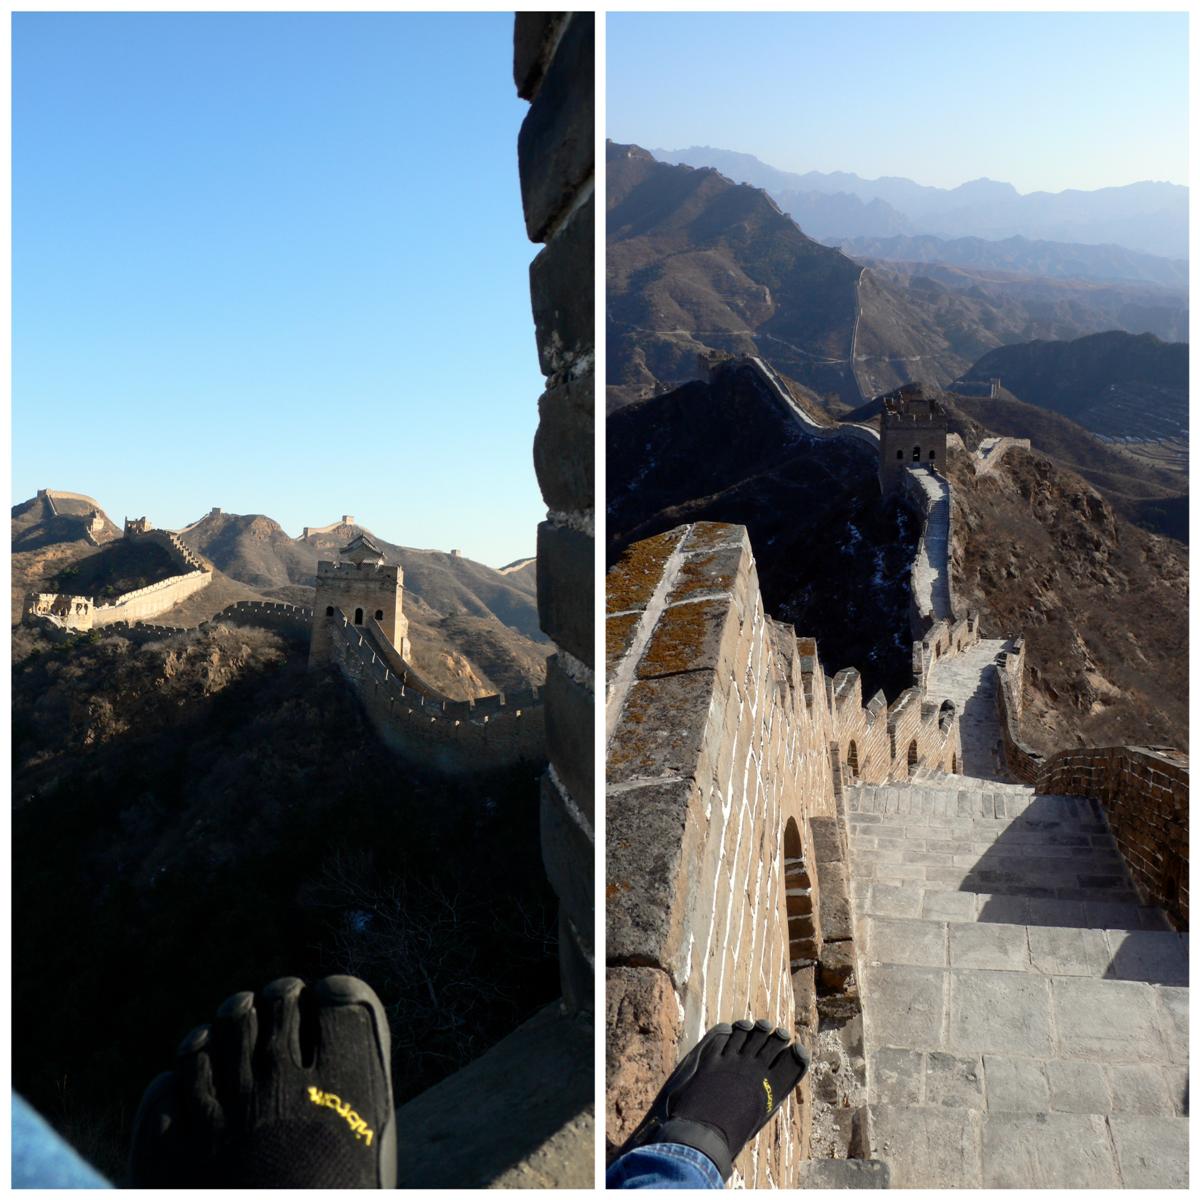 David hiked to the Great Wall of China in his Five Finger KSOs.  Here are two VFF-shod views from a scenic section!